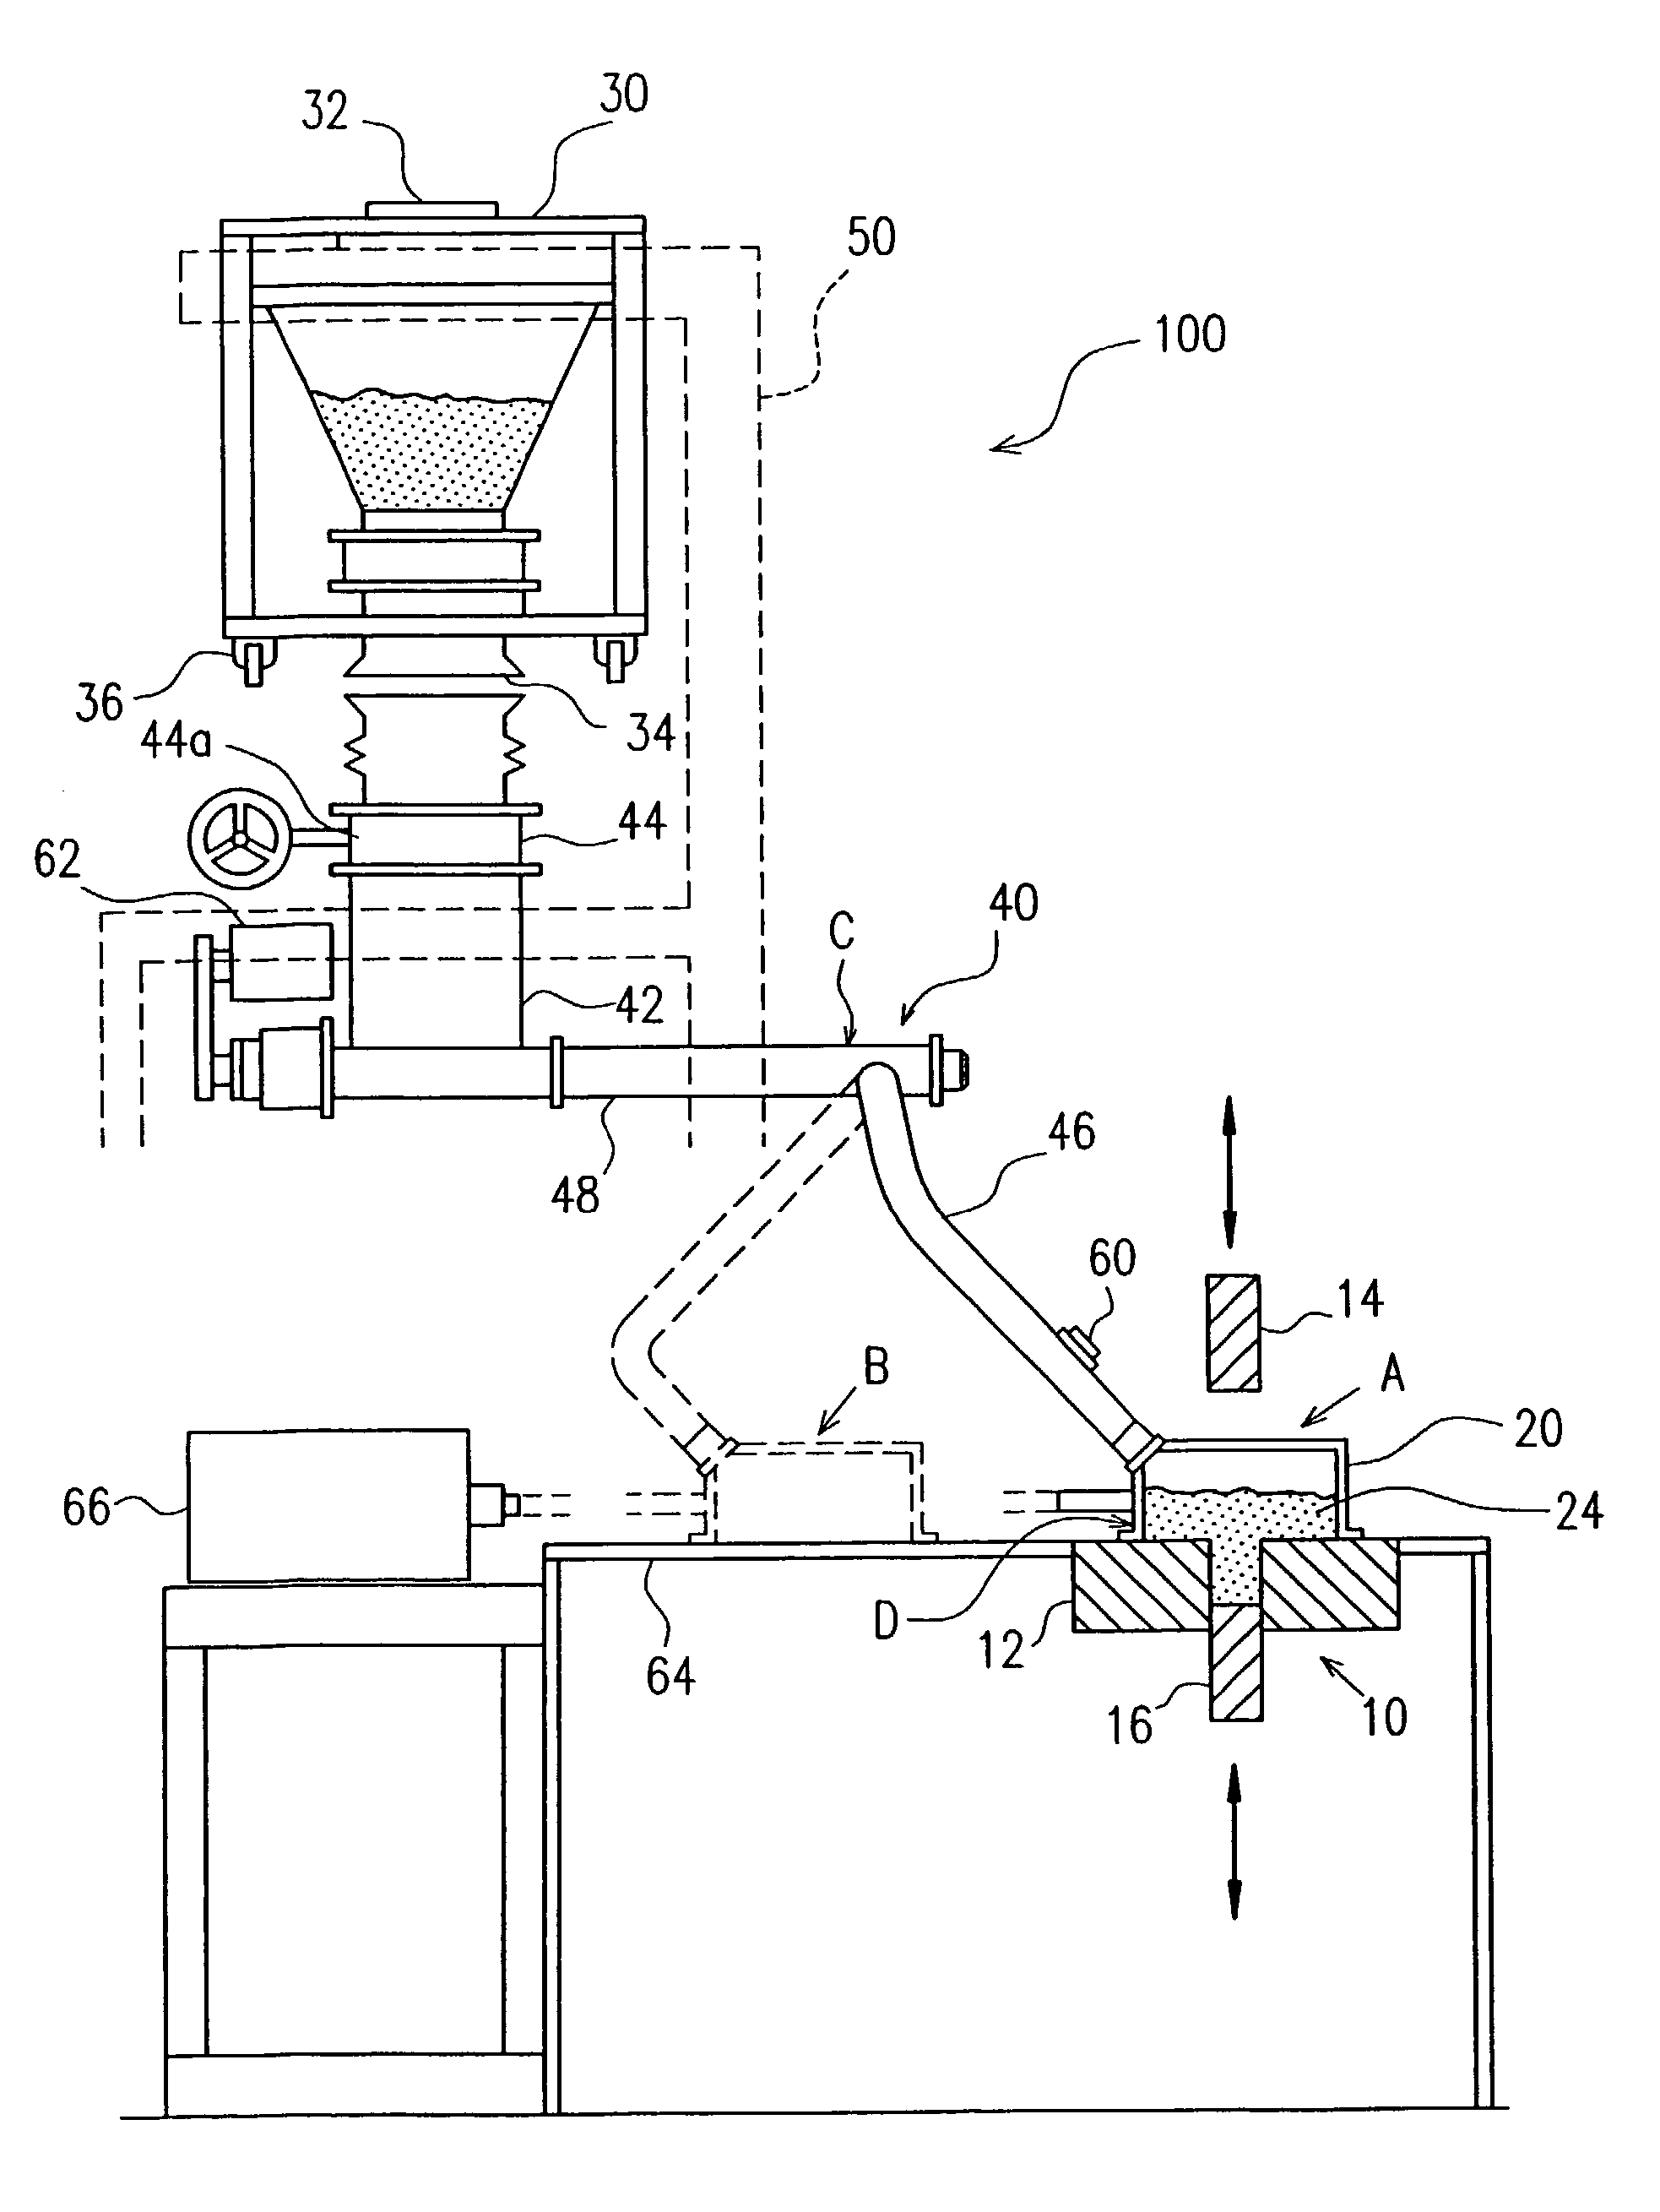 Powder compacting apparatus and method of producing a rare-earth magnet using the same